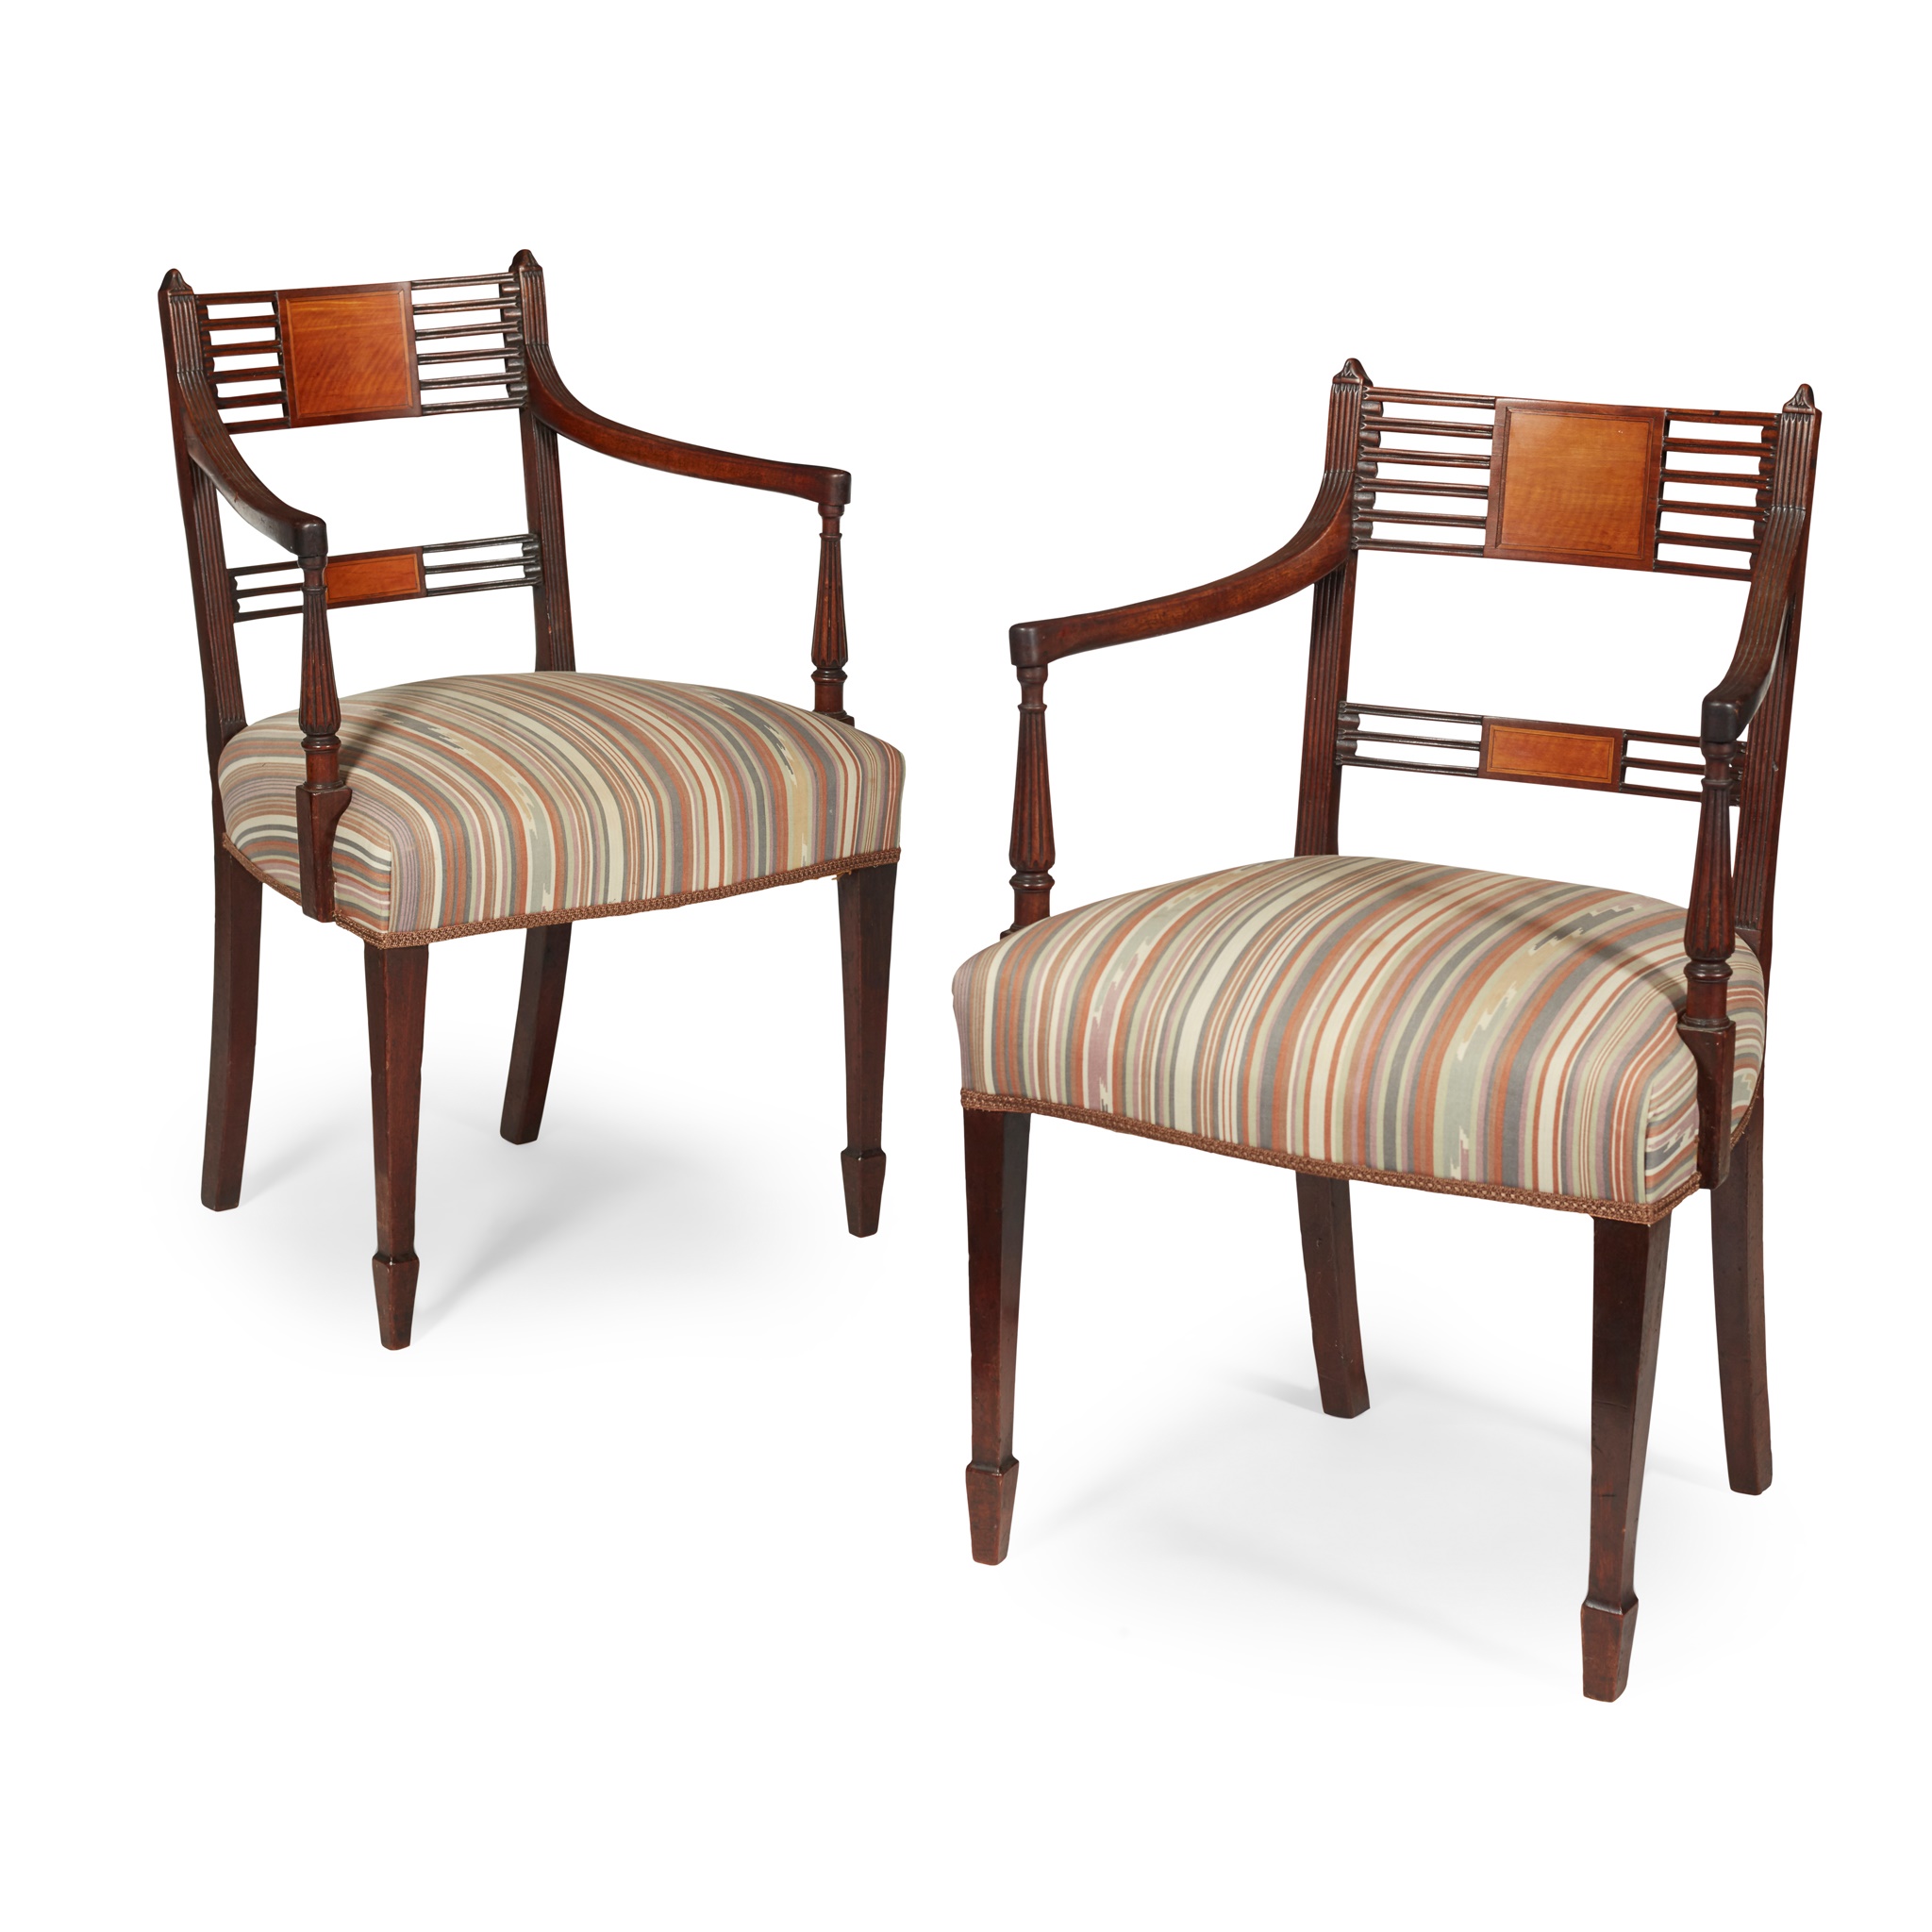 PAIR OF GEORGE III MAHOGANY AND SATINWOOD ARMCHAIRS LATE 18TH CENTURY